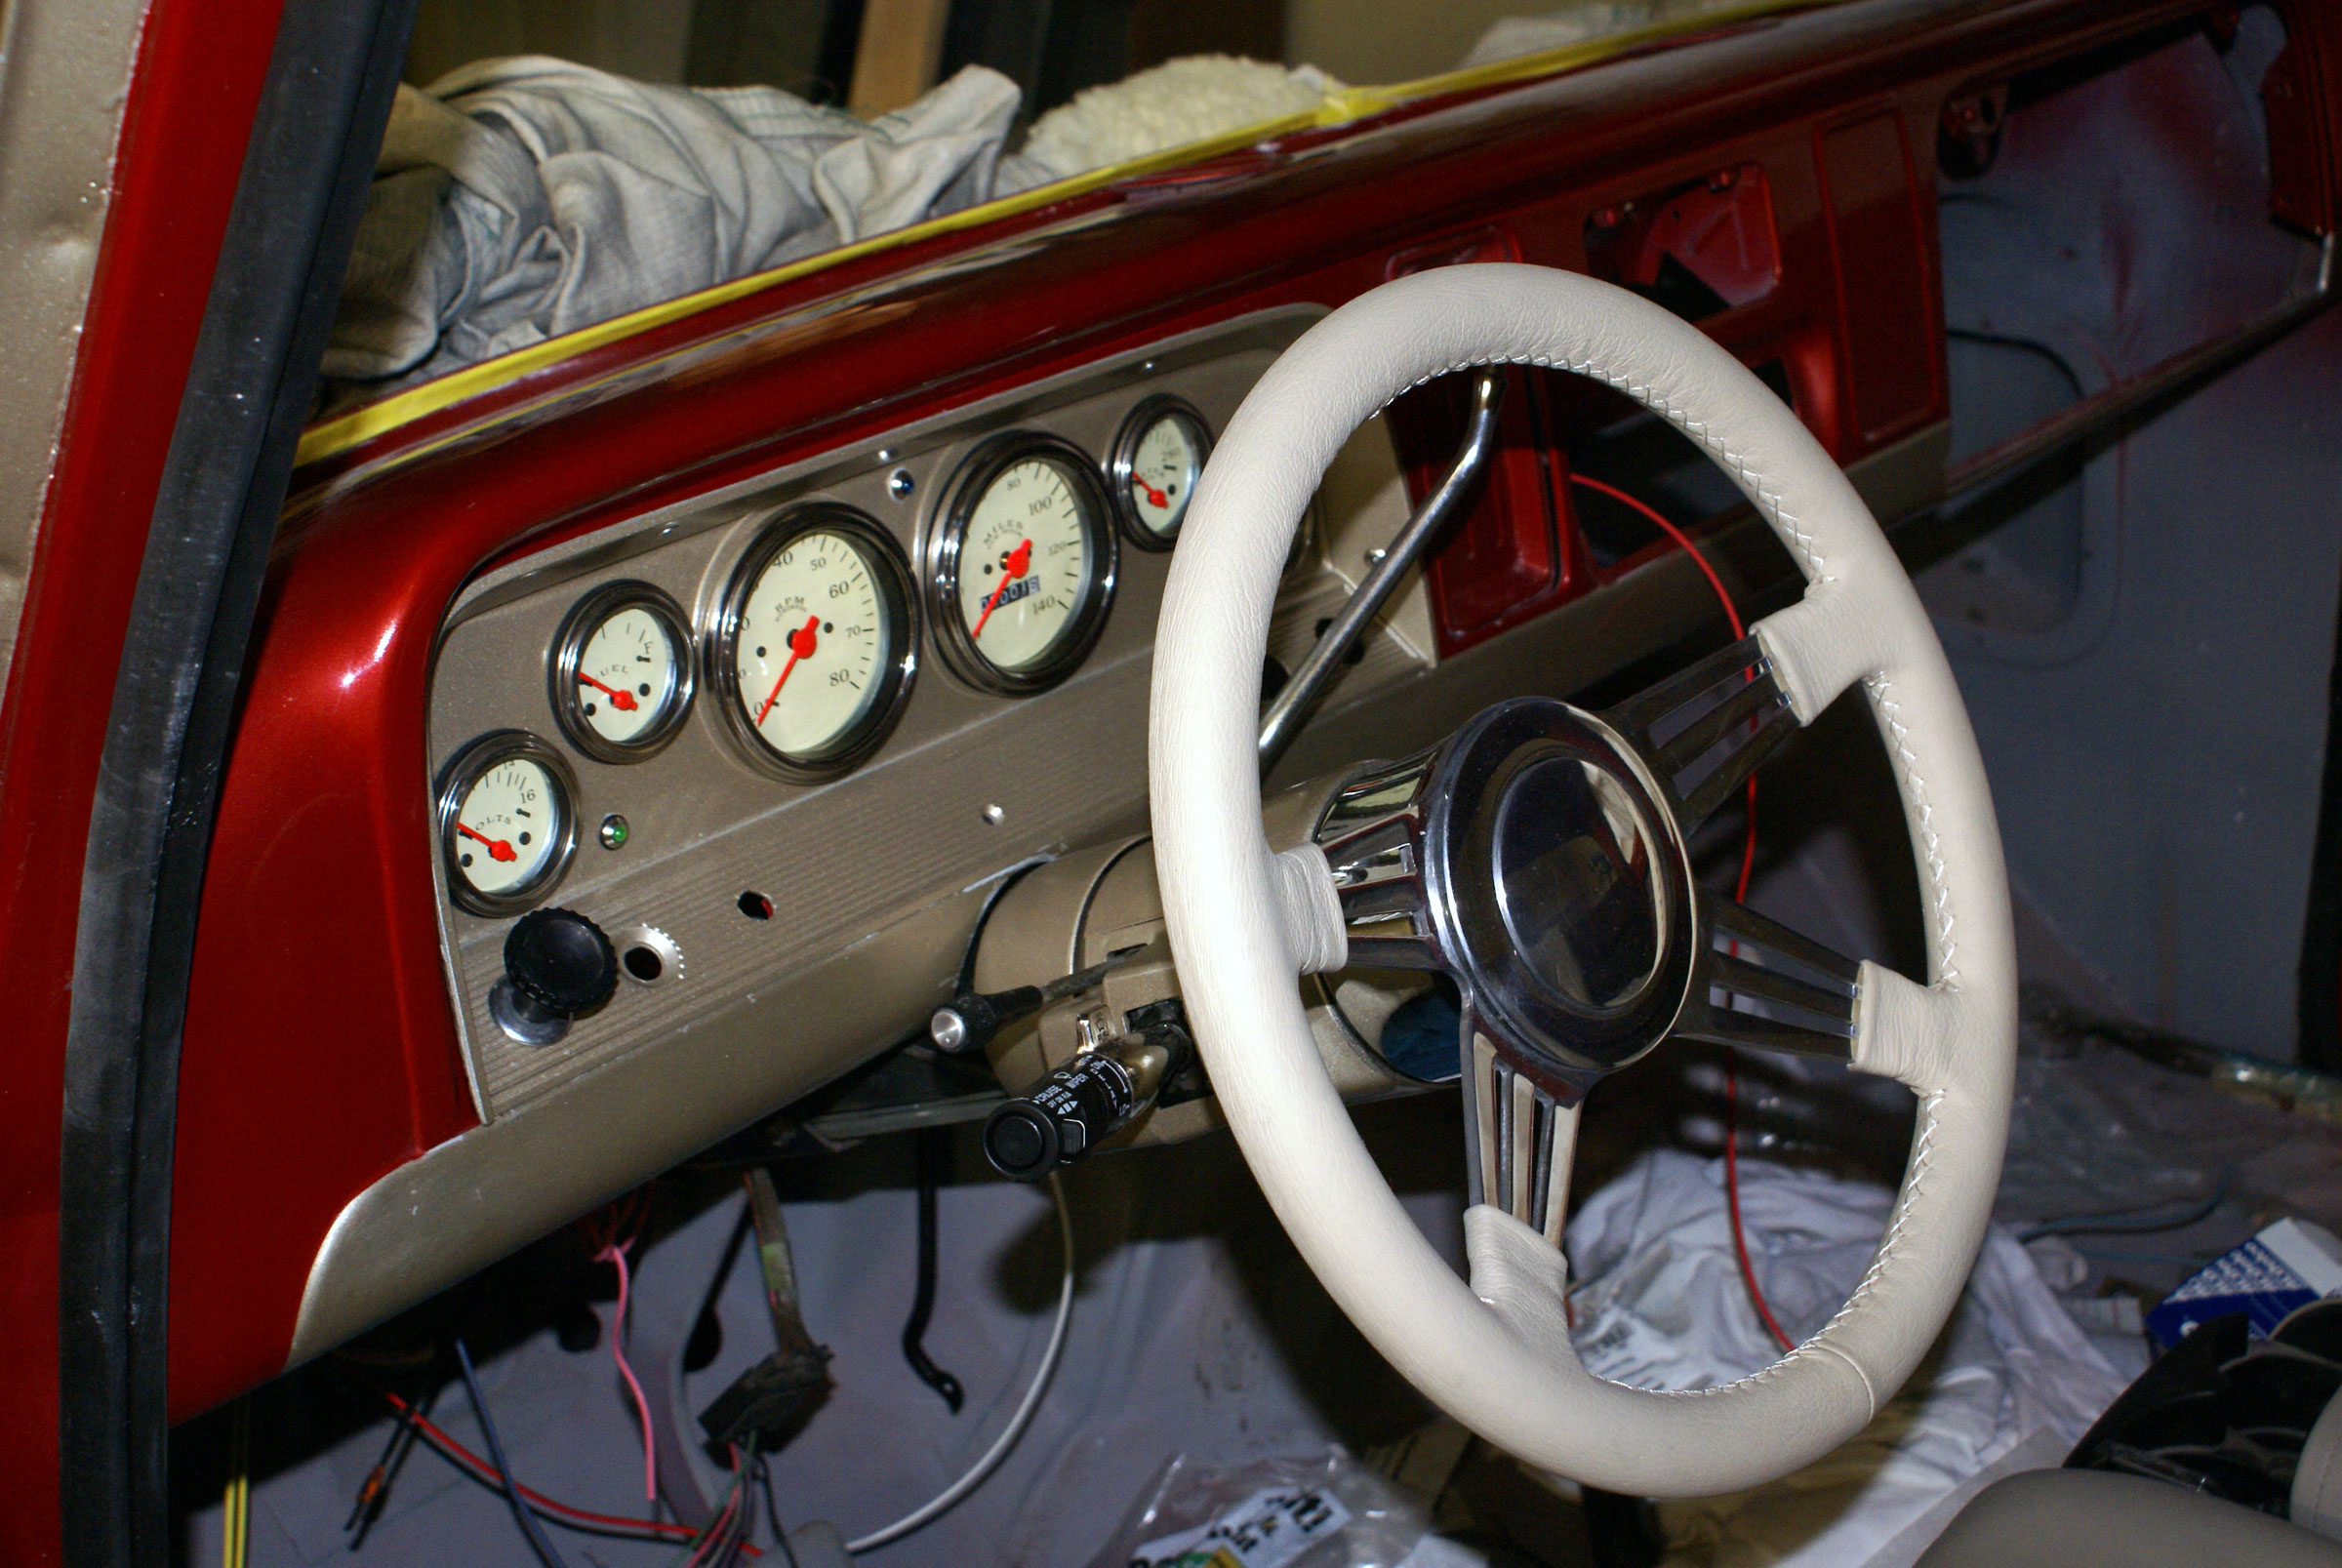 view of instrument panel in truck